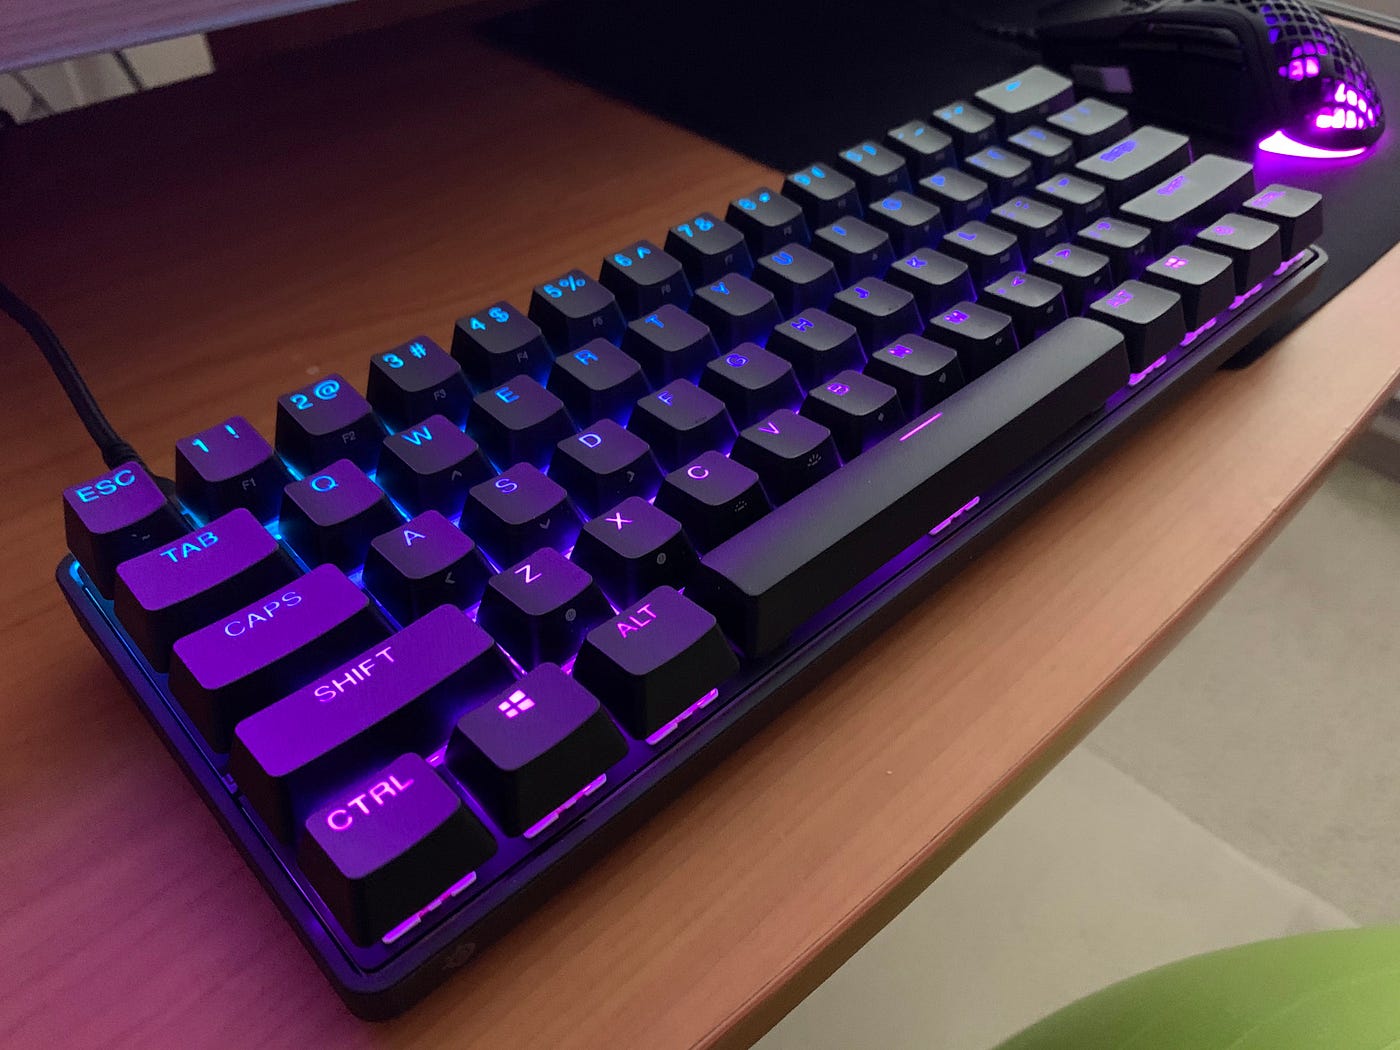 SteelSeries Apex Pro gaming keyboard review: Close to perfect